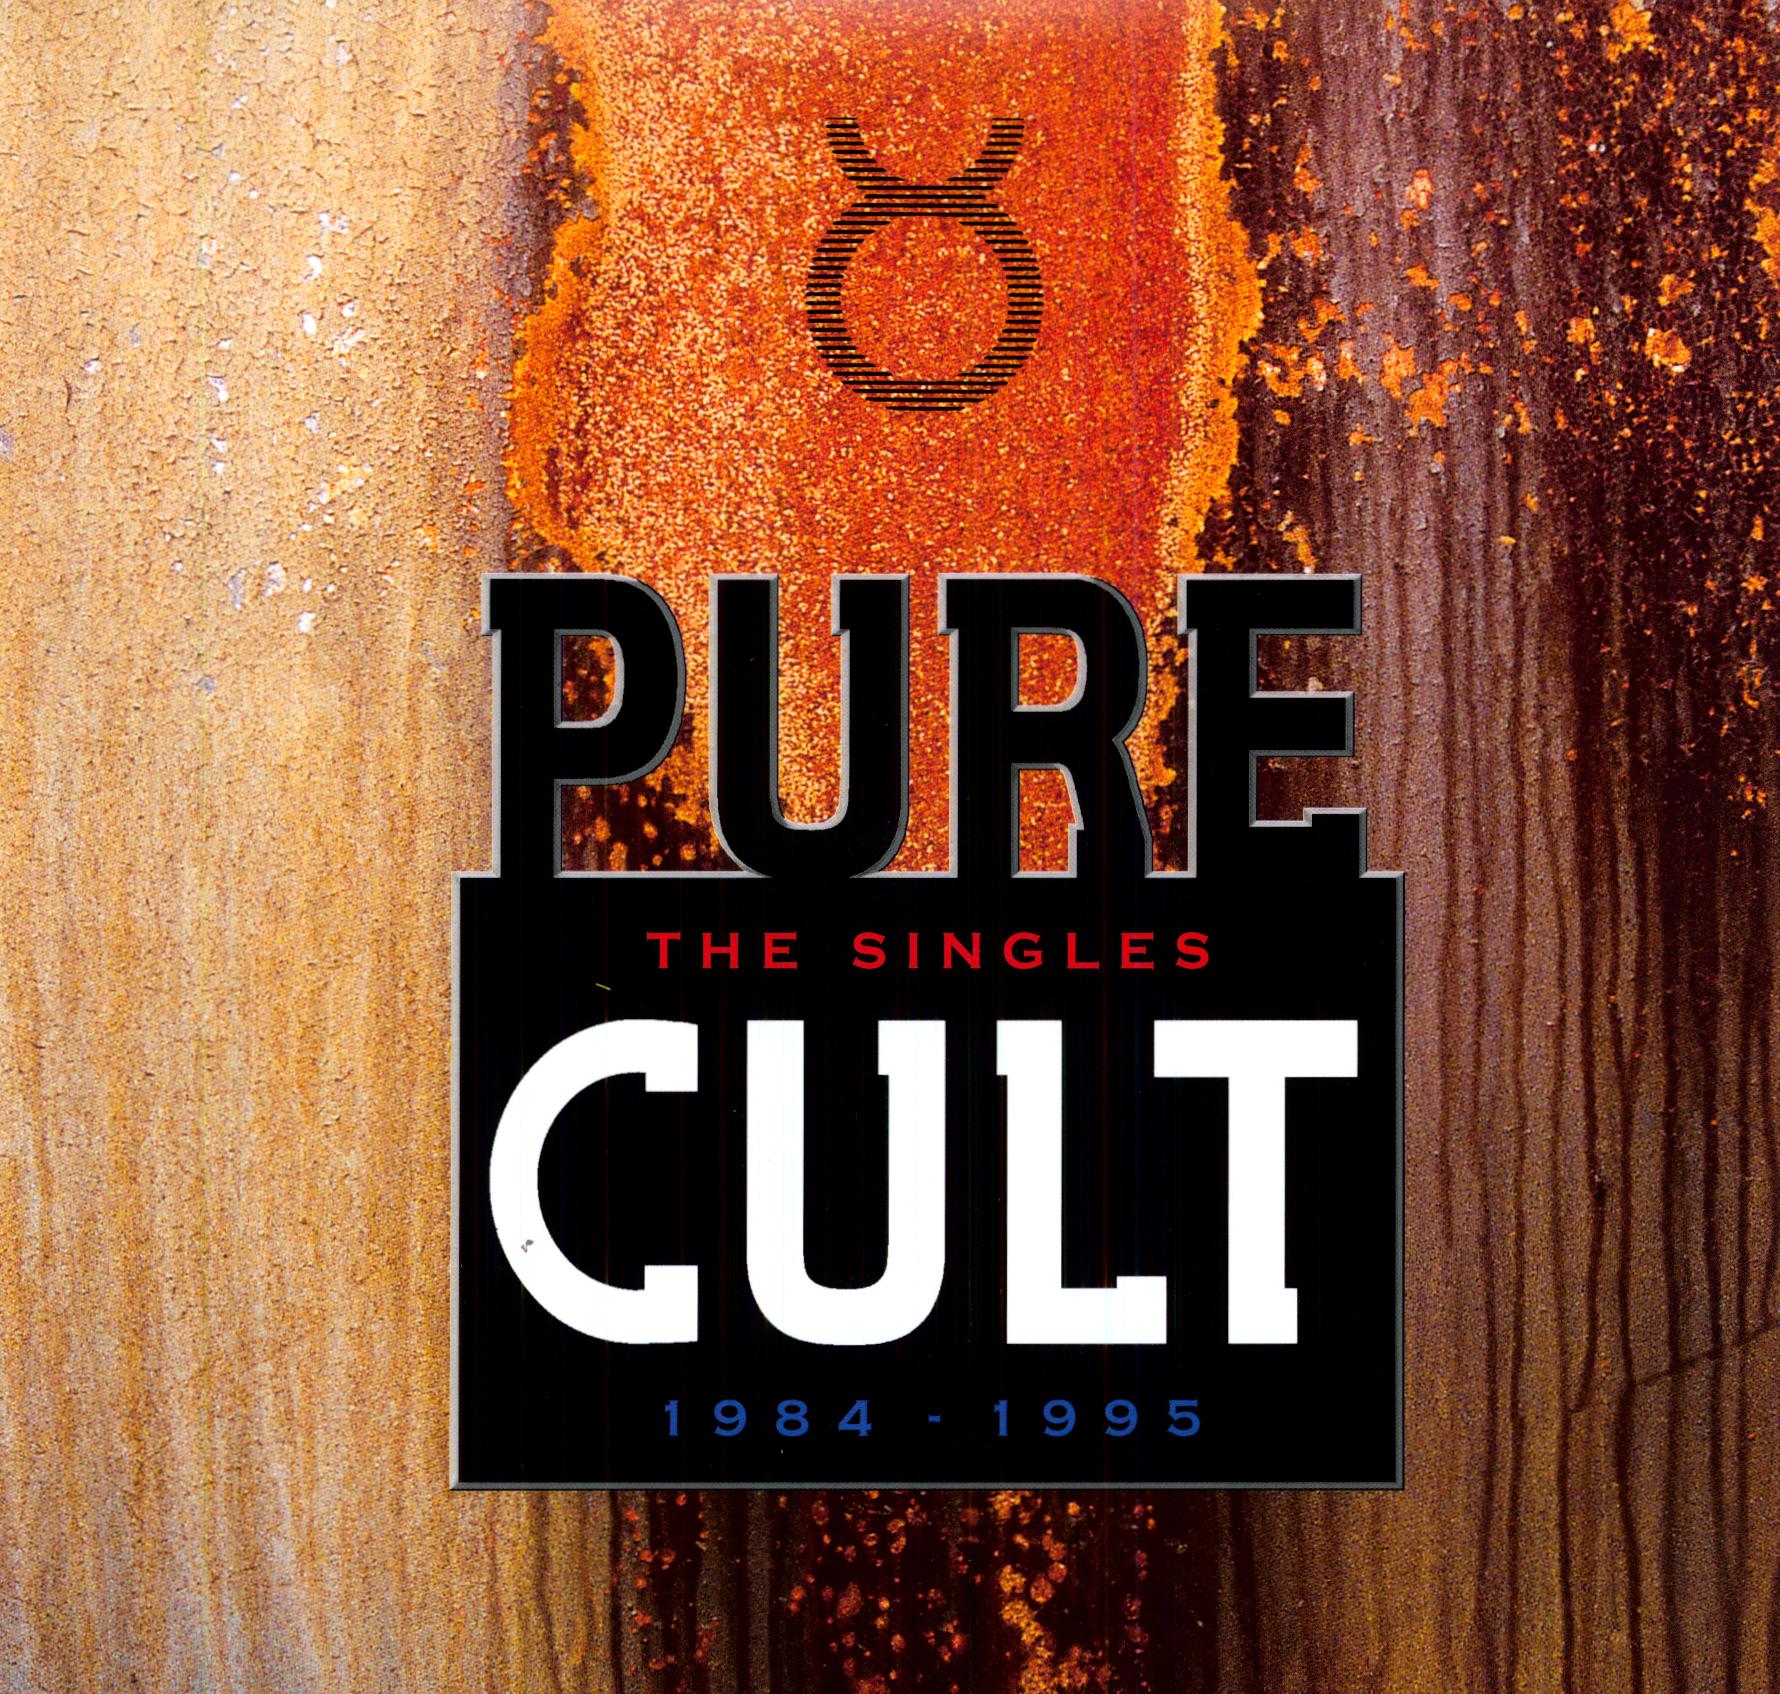 PURE CULT: THE SINGLES 1984-1995